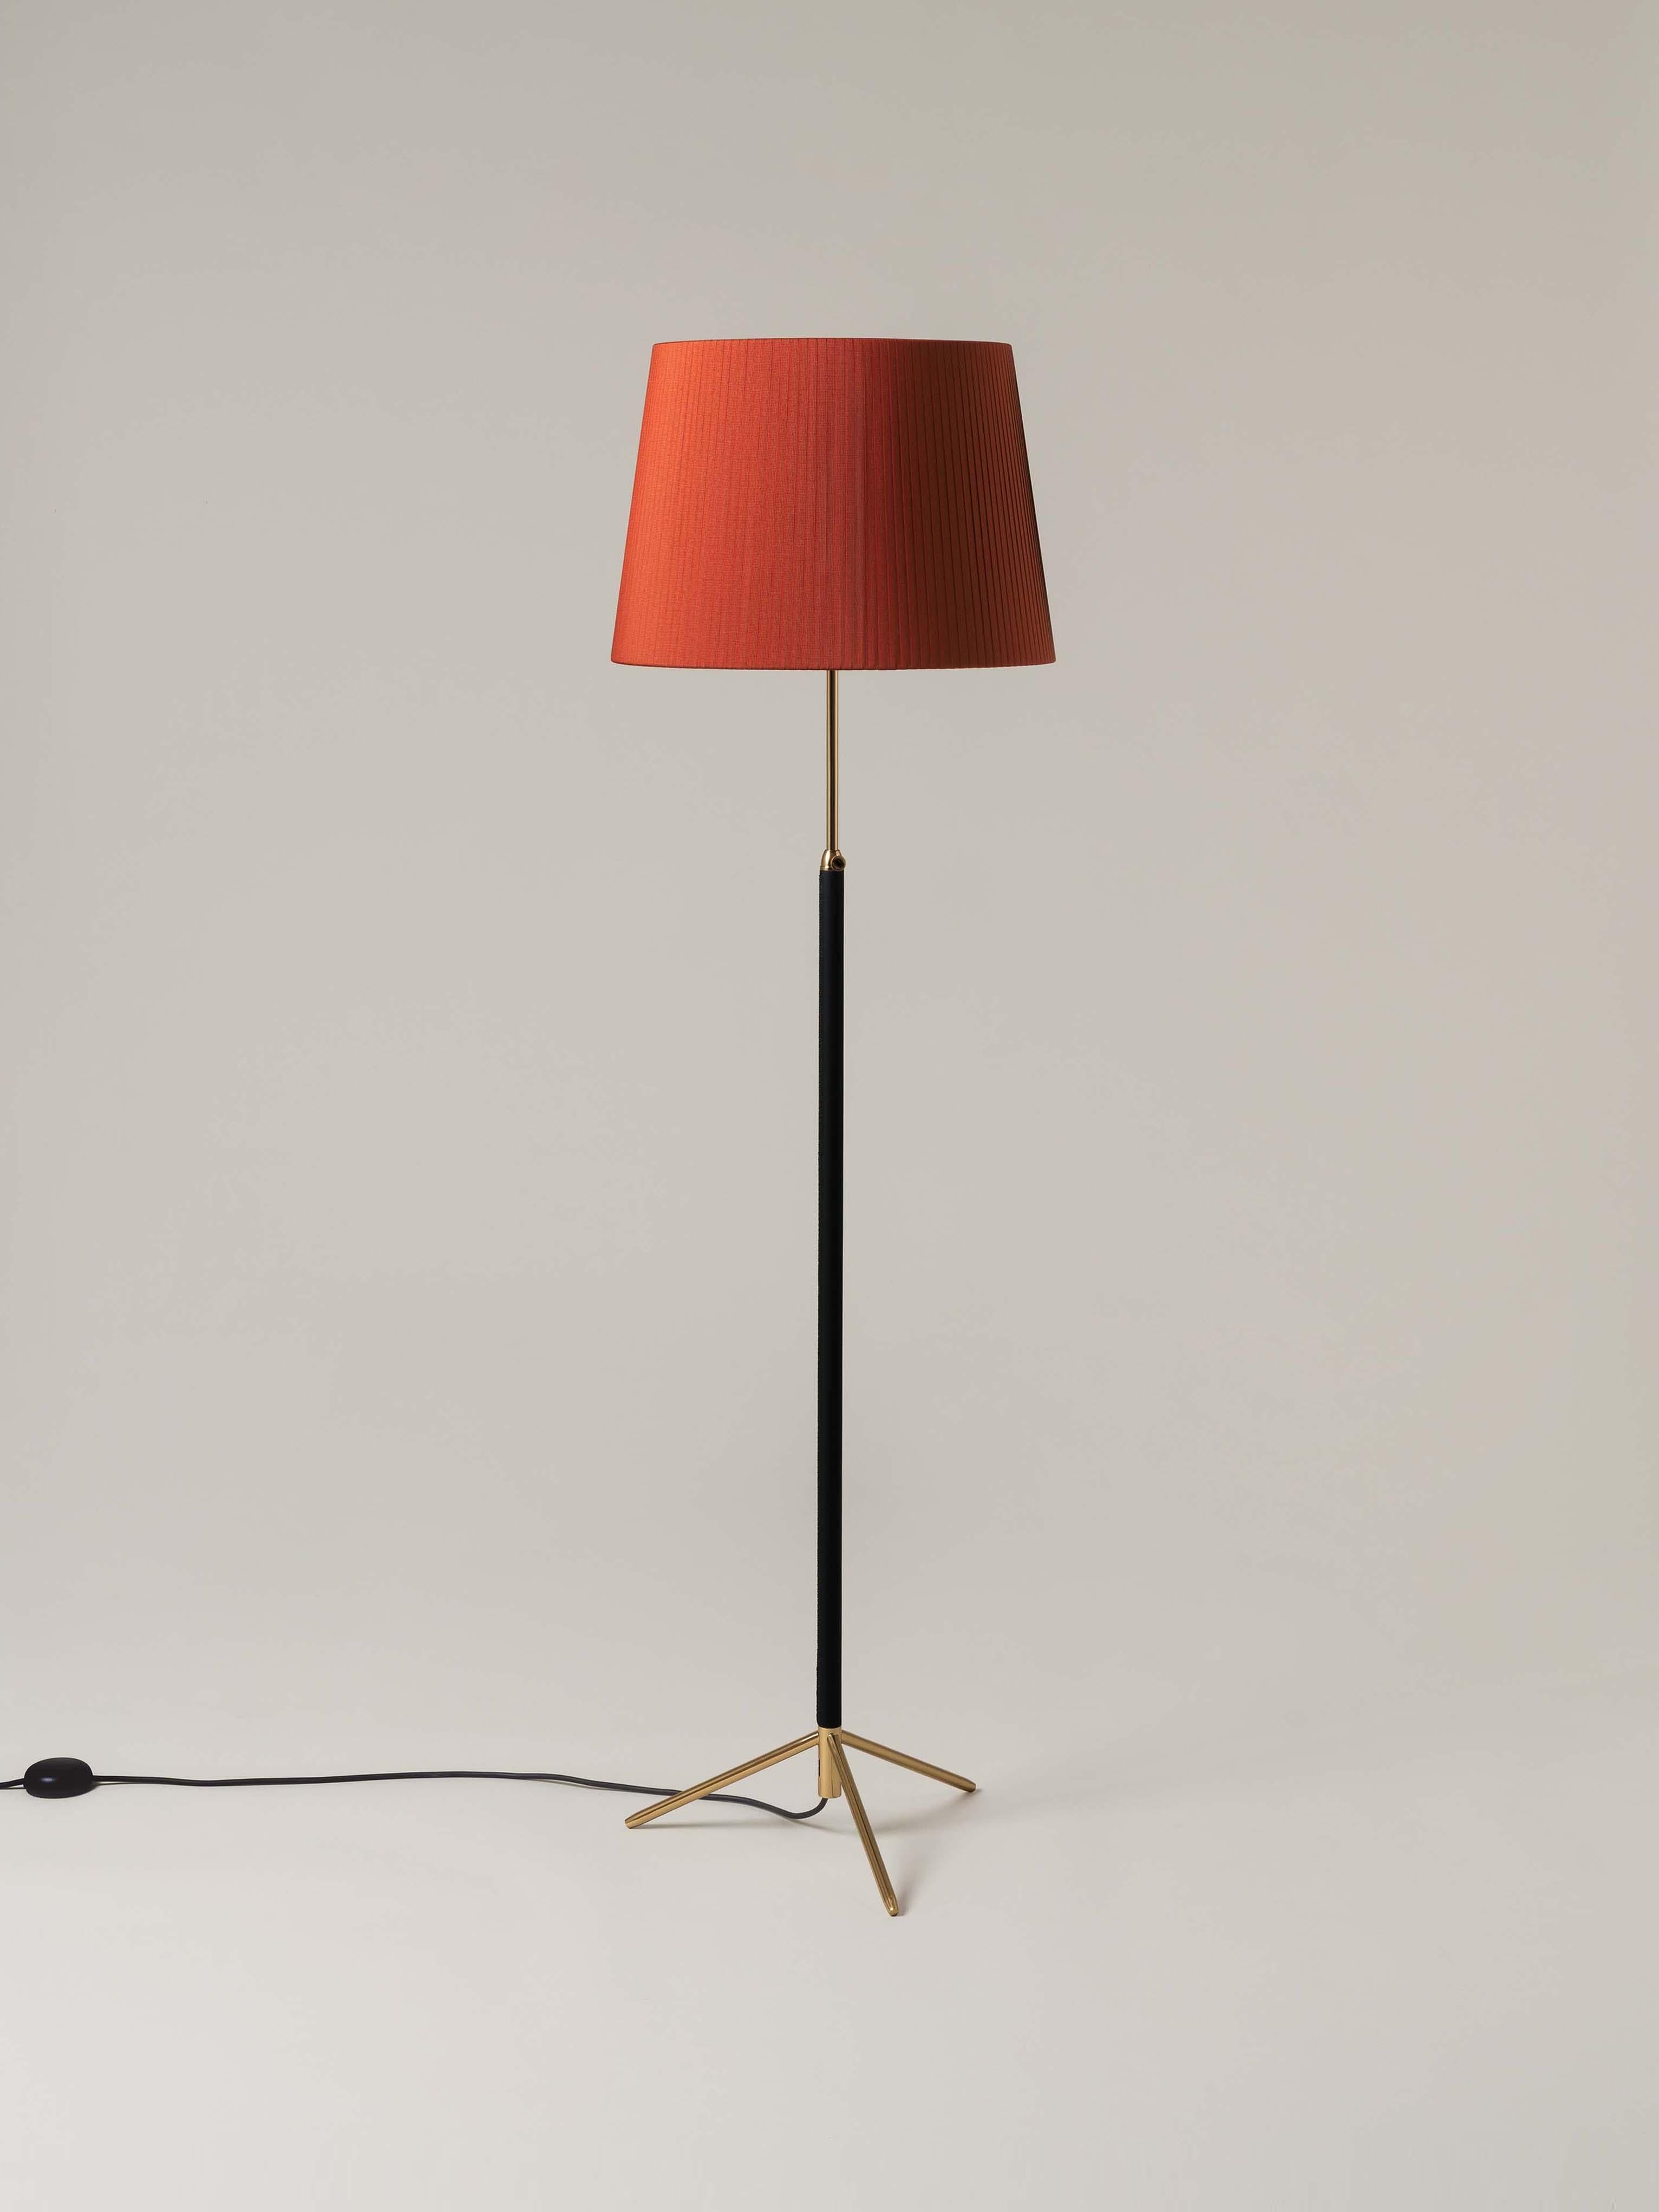 Red and brass pie de Salón G1 floor lamp by Jaume Sans.
Dimensions: D 45 x H 120-160 cm.
Materials: Metal, leather, ribbon.
Available in chrome-plated or polished brass structure.
Available in other shade colors and sizes.

This slender